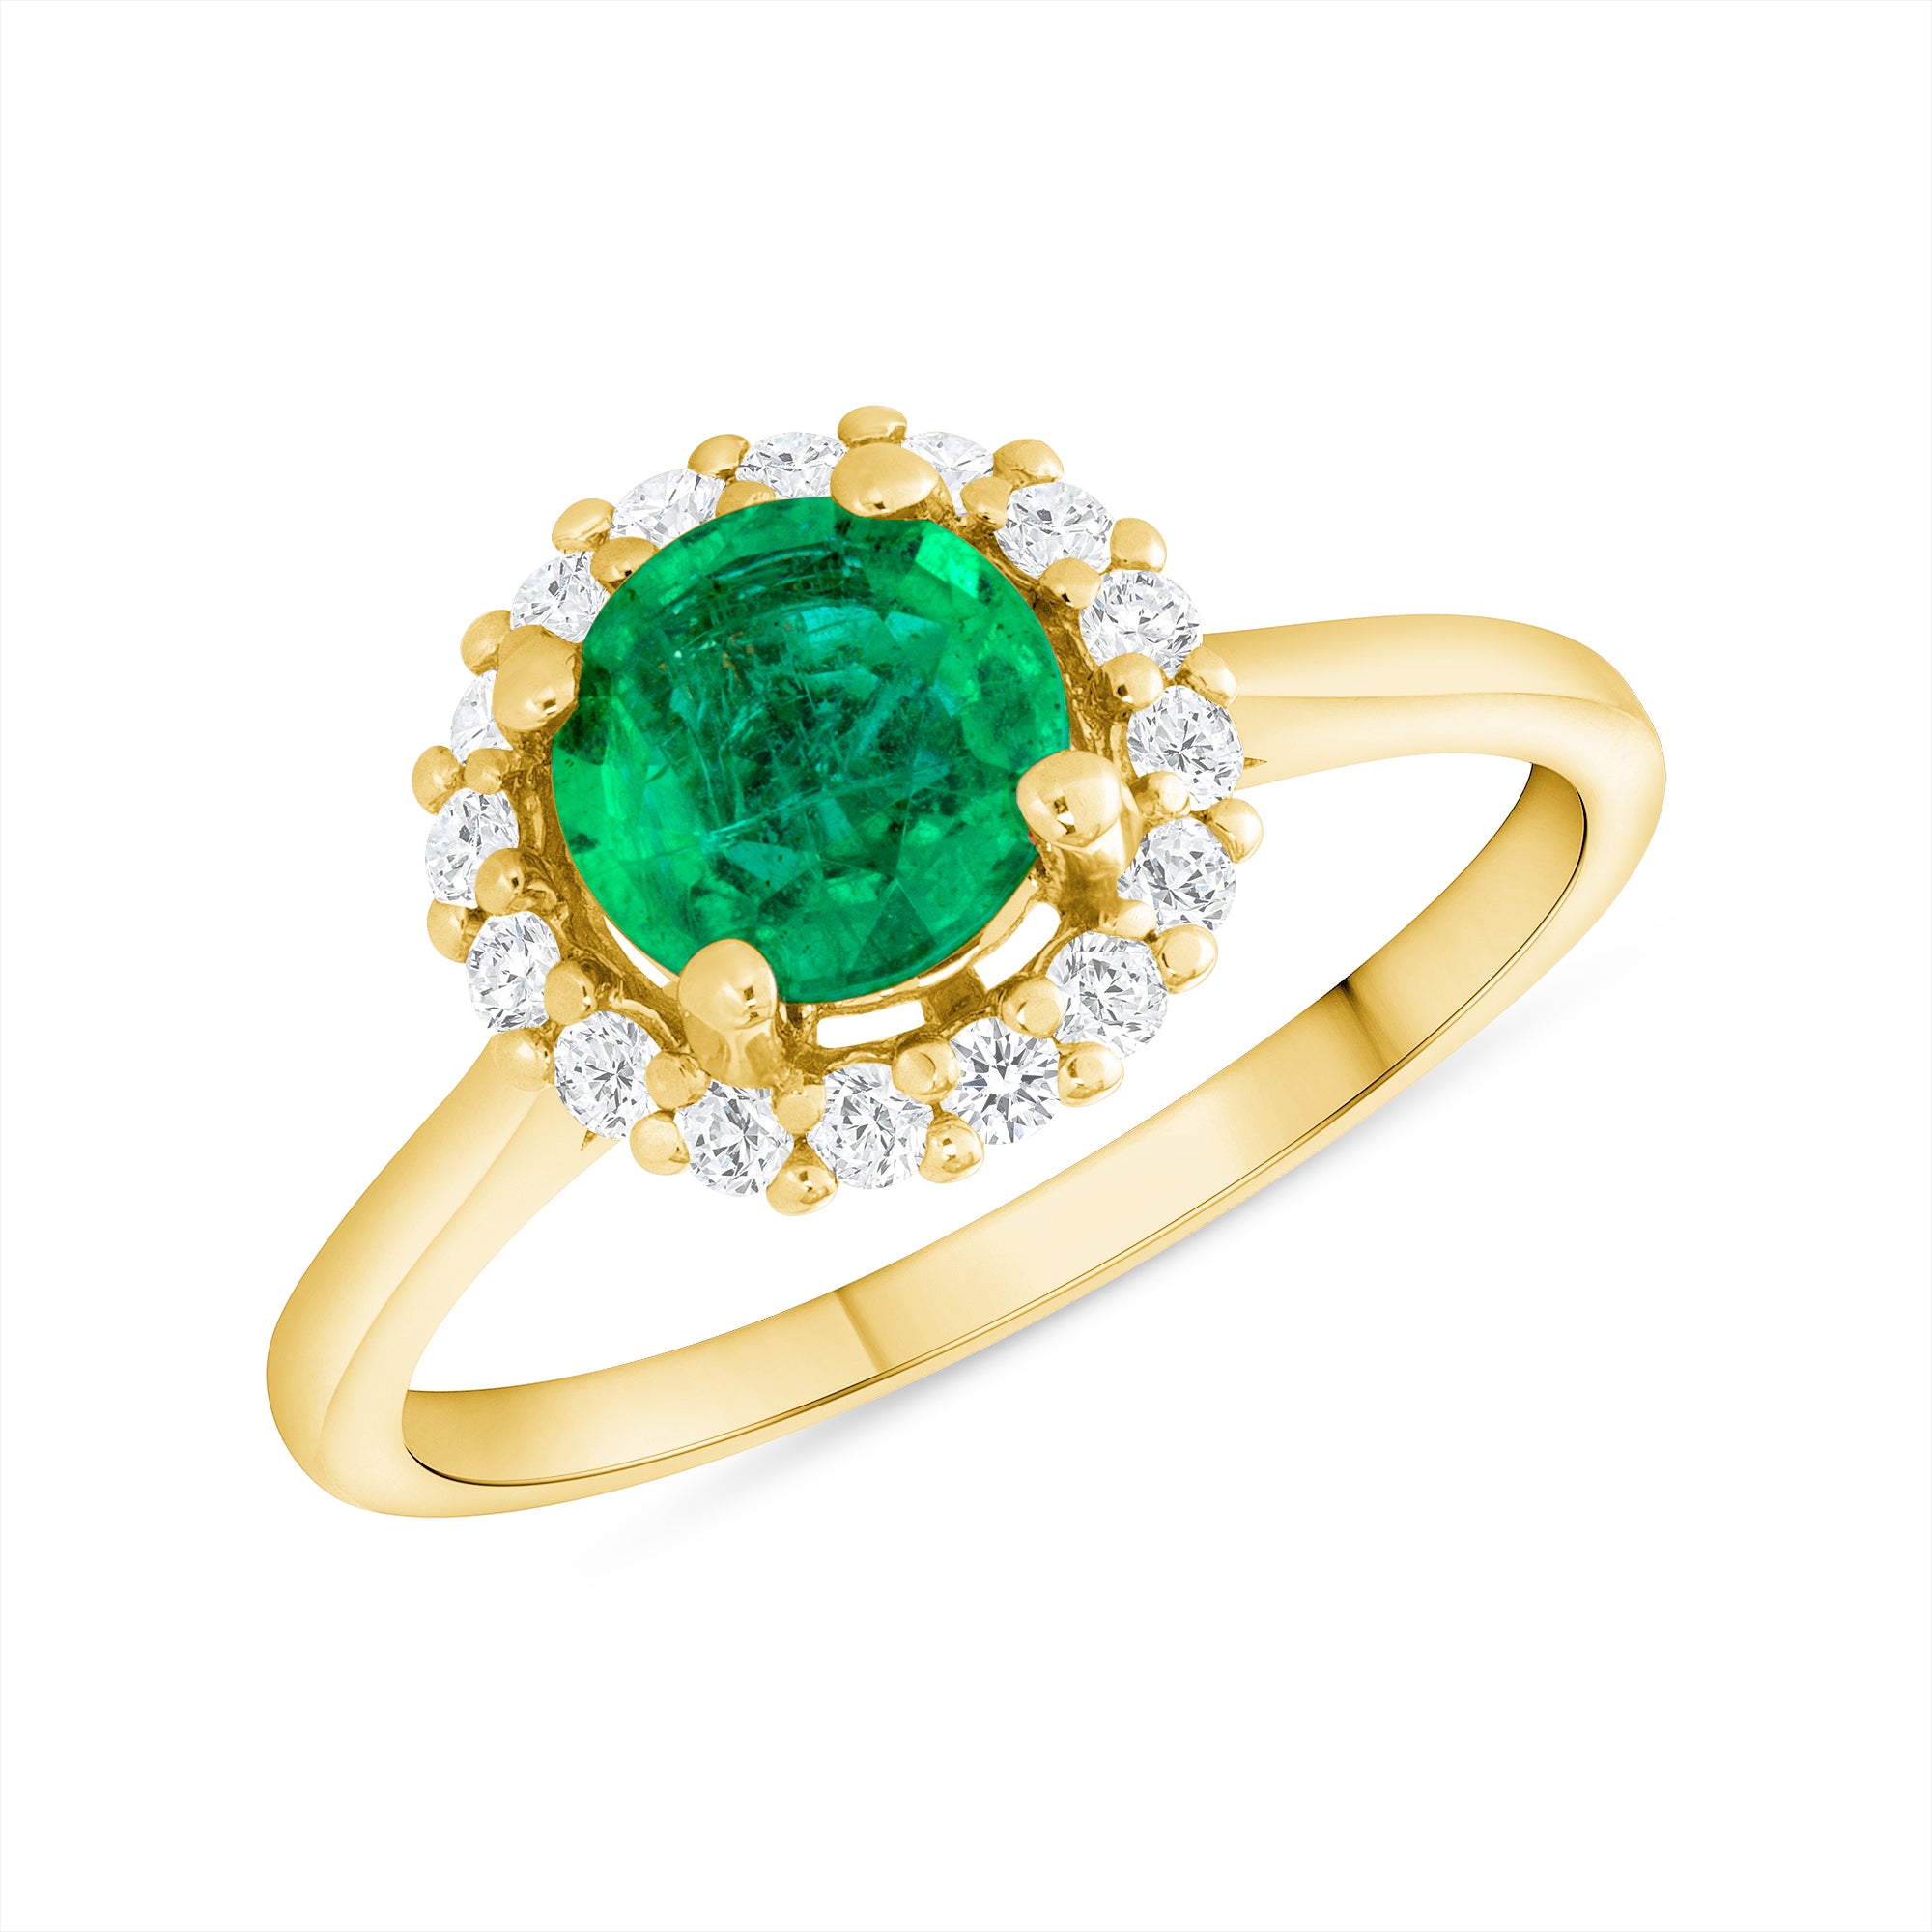 Halo Style Emerald Ring with Round Diamonds in 14k yellow Gold